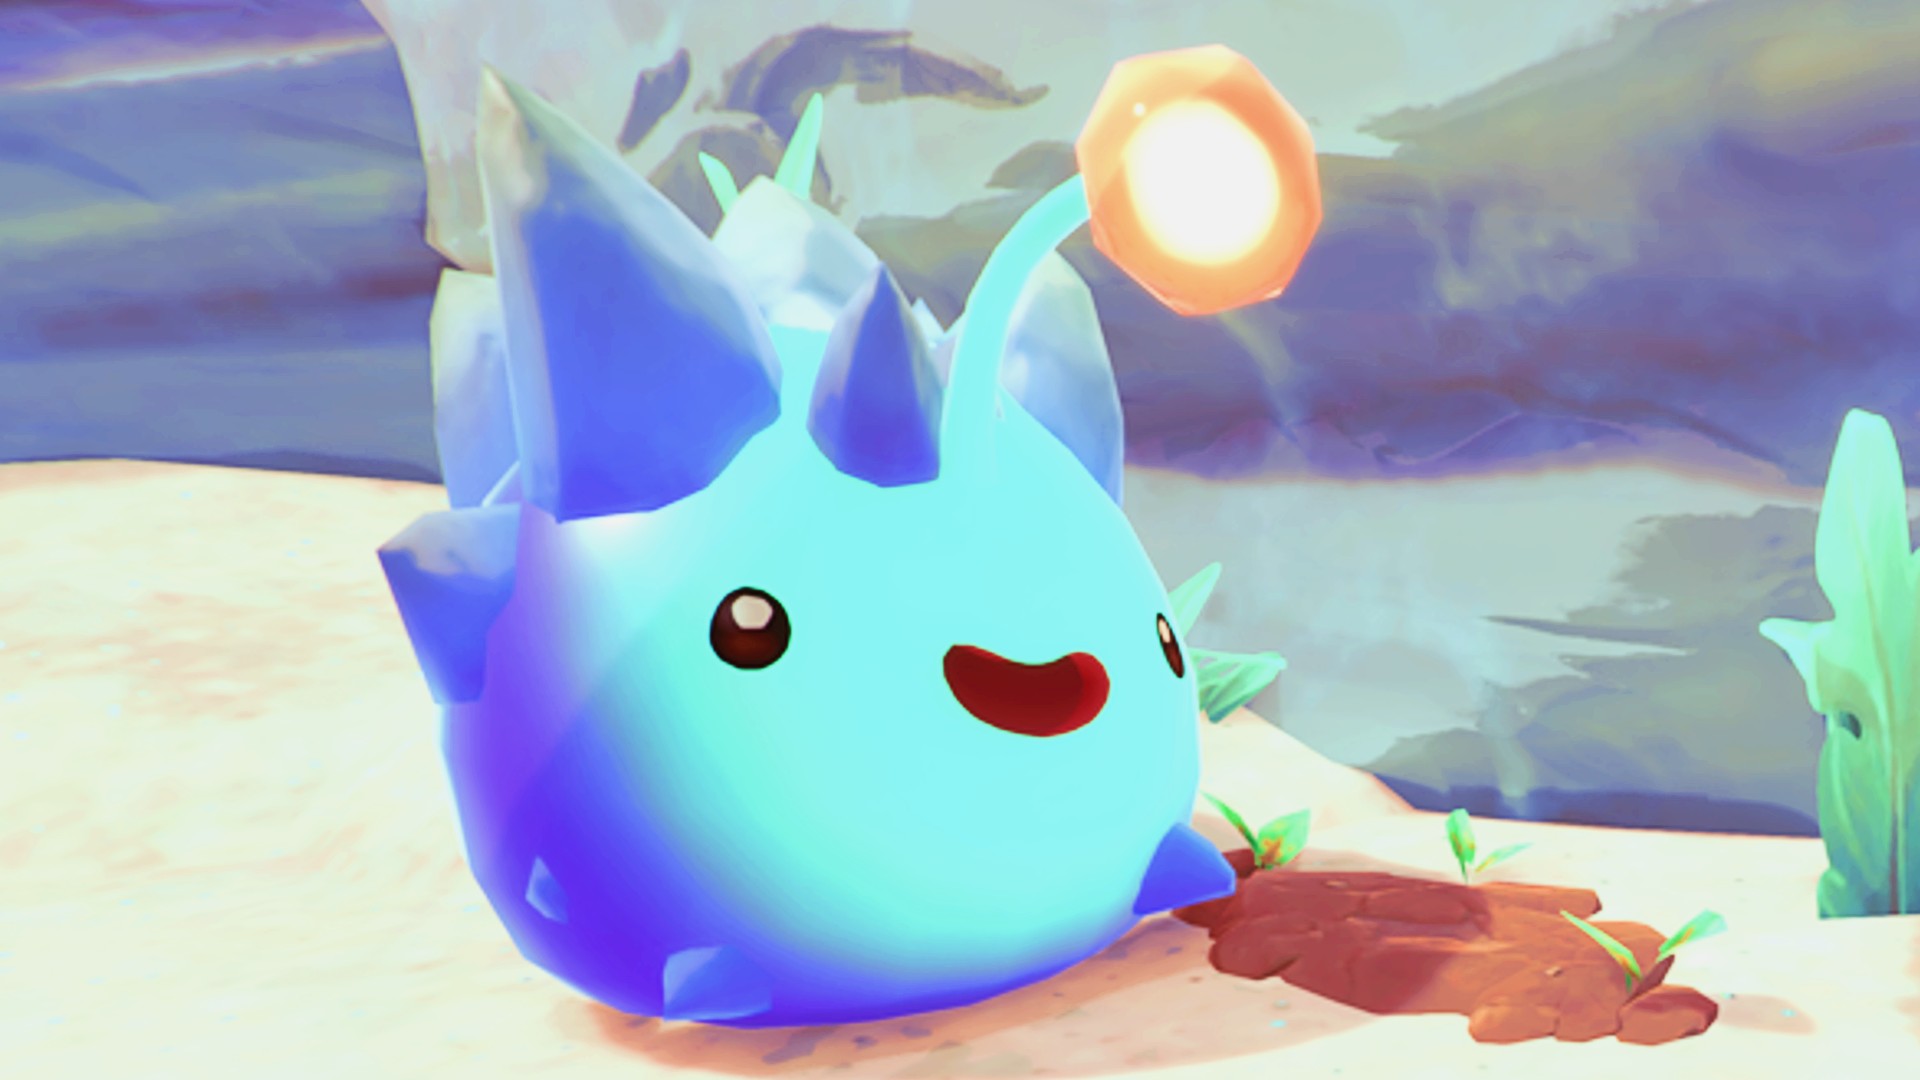 Is Slime Rancher 2 multiplayer?